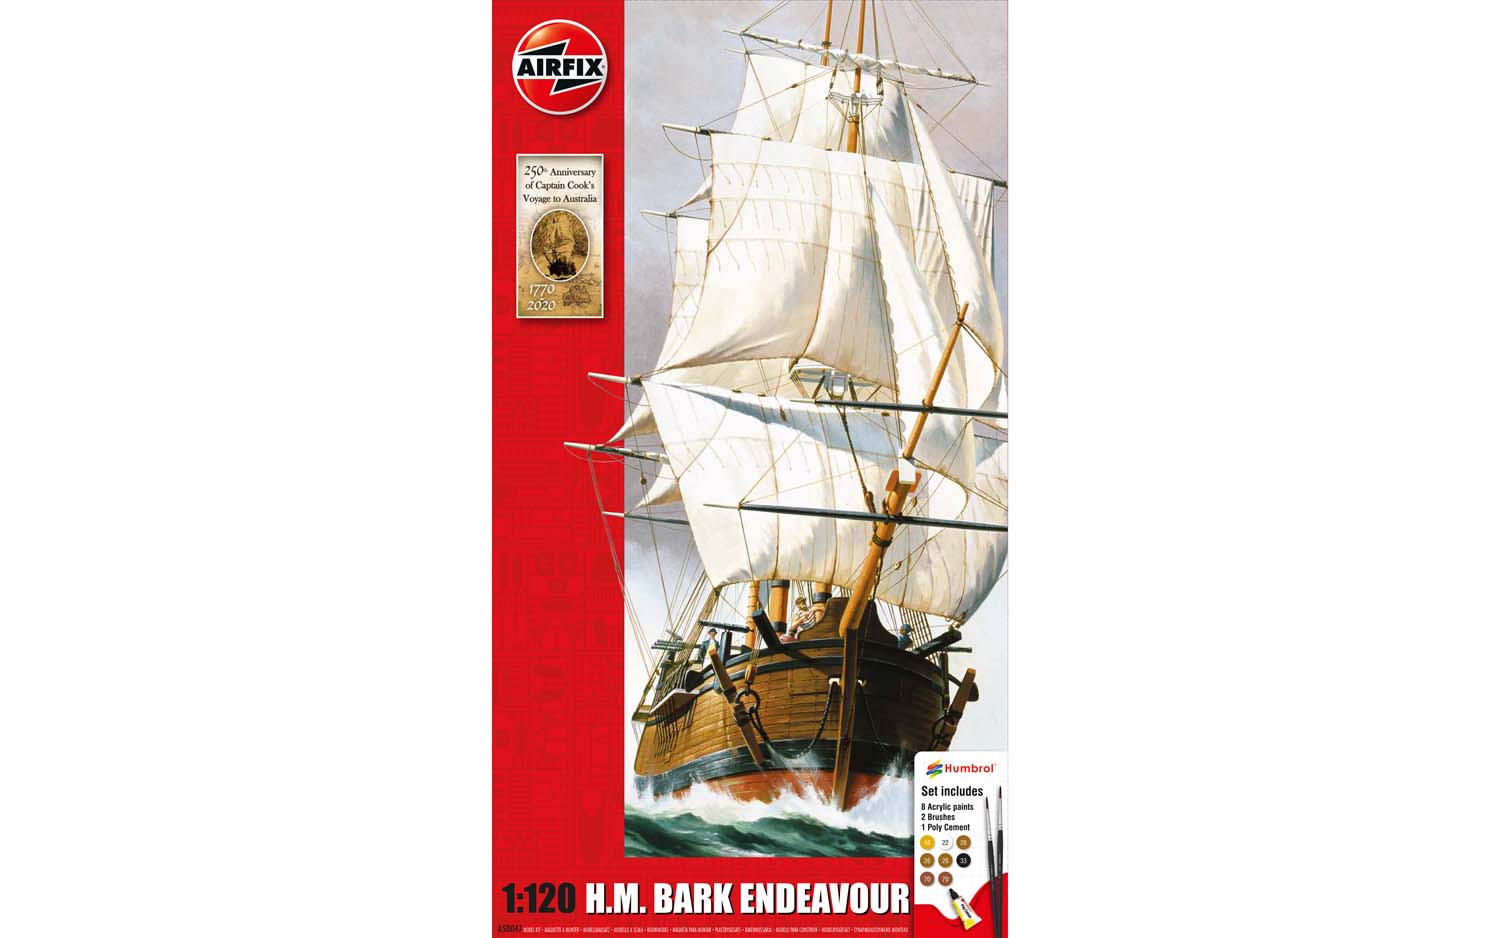 Endeavour Bark and Captain Cook 250th anniversary